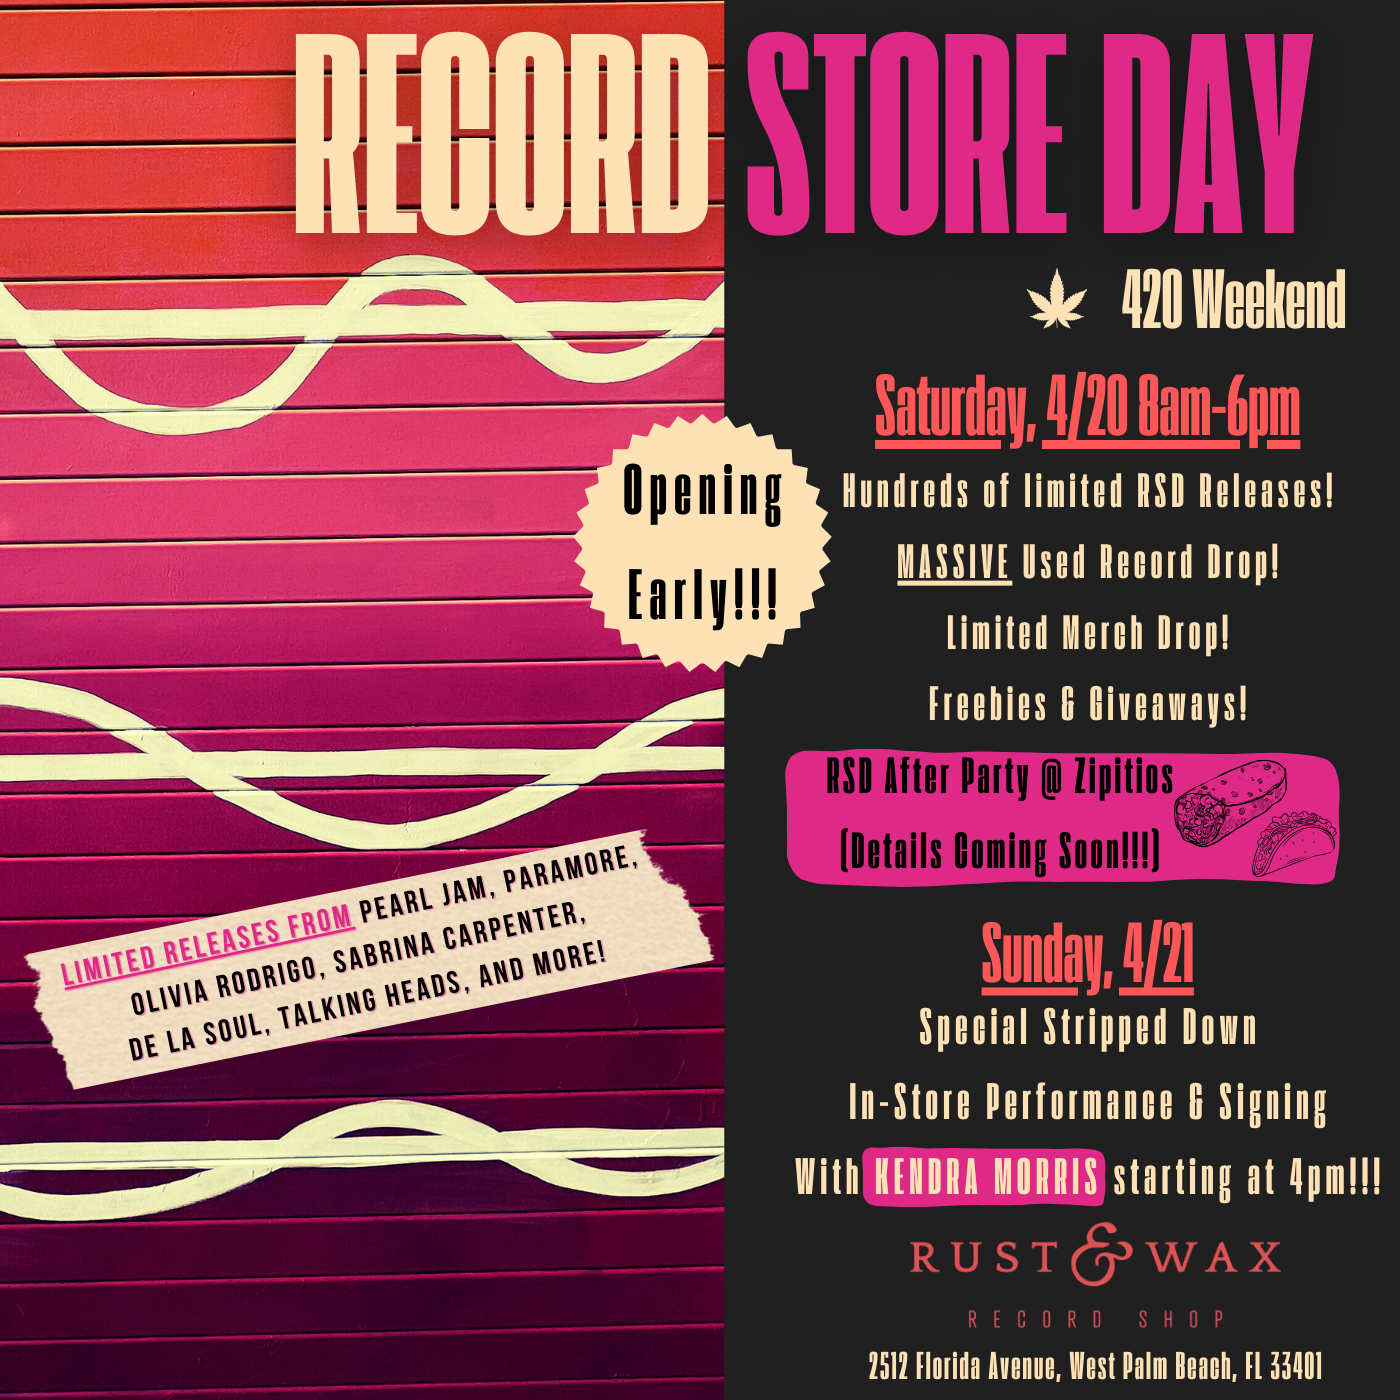 Image depicts Rust & Wax garage door with orange to pink gradient and sound waves and details for Record Store Day weekend, as outlined in this blog post